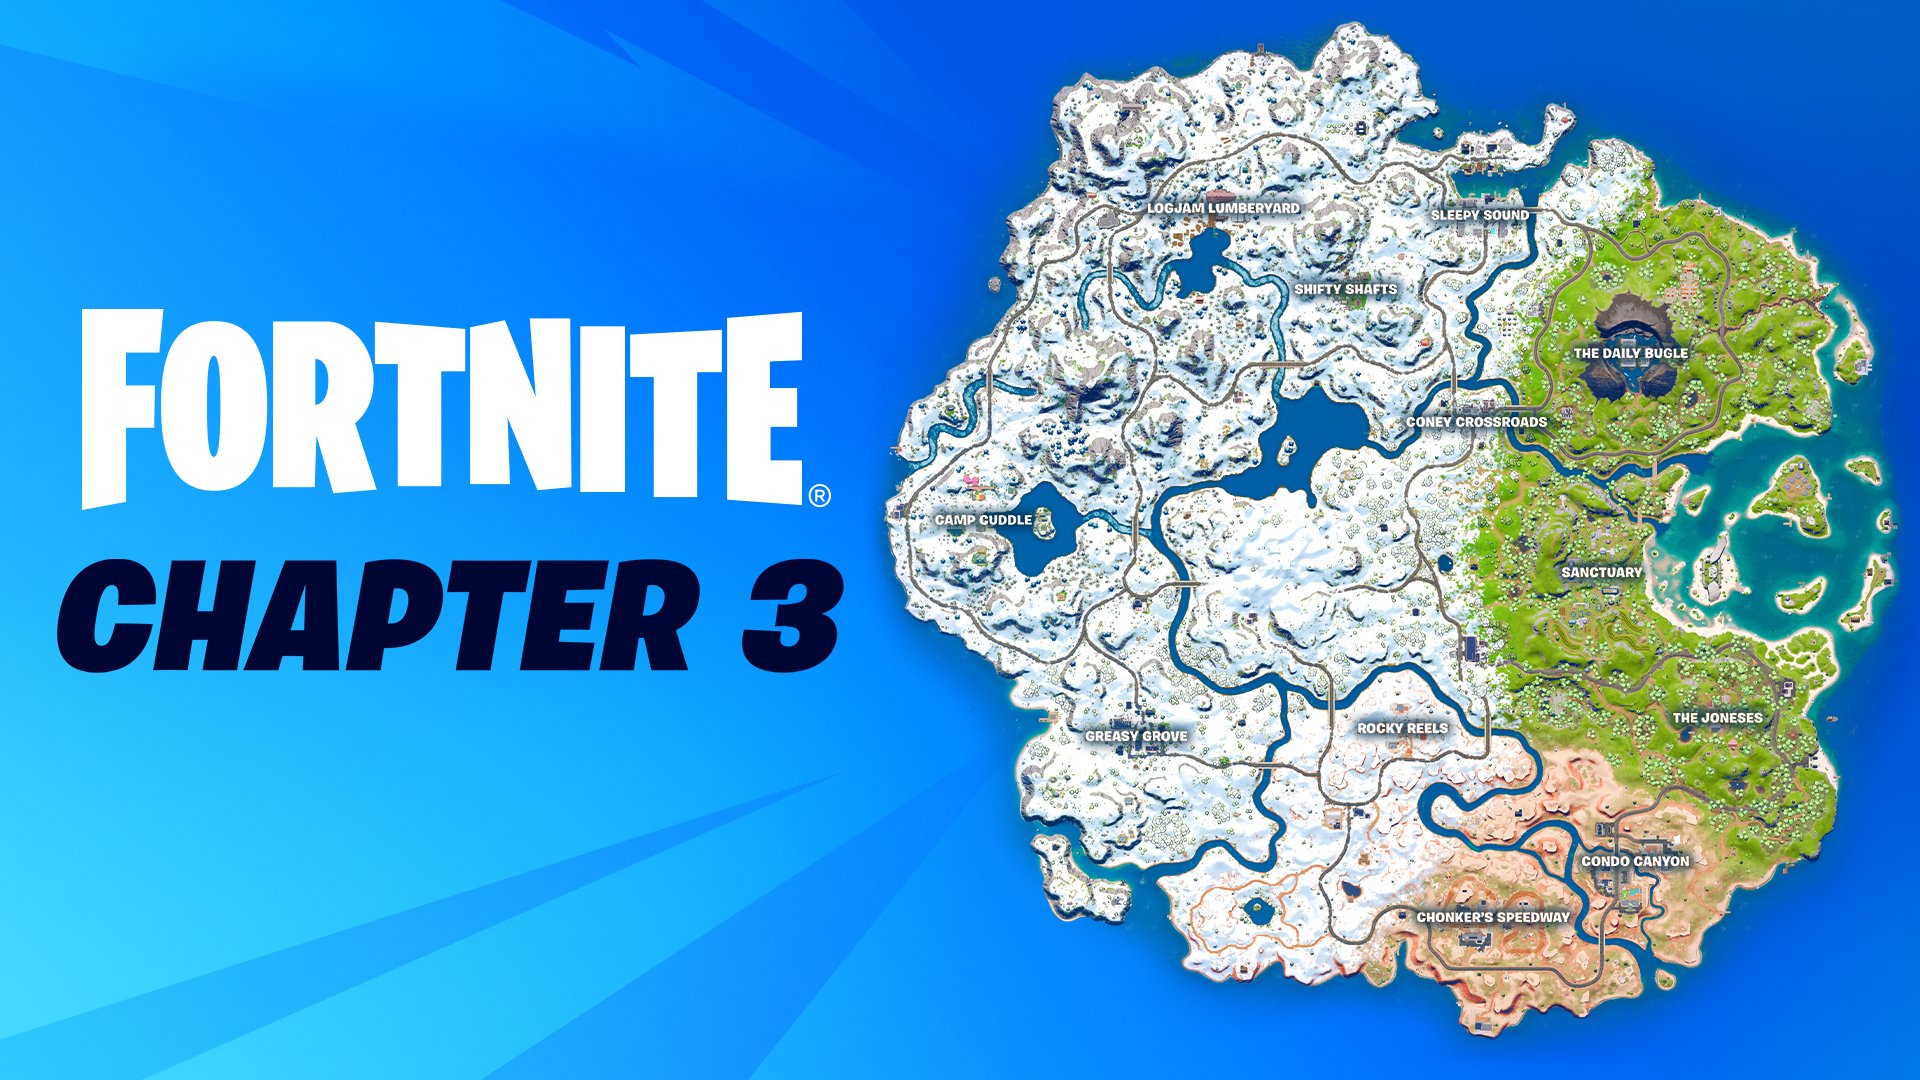 Check Out What's New in Fortnite Battle Royale Chapter 3 - Season